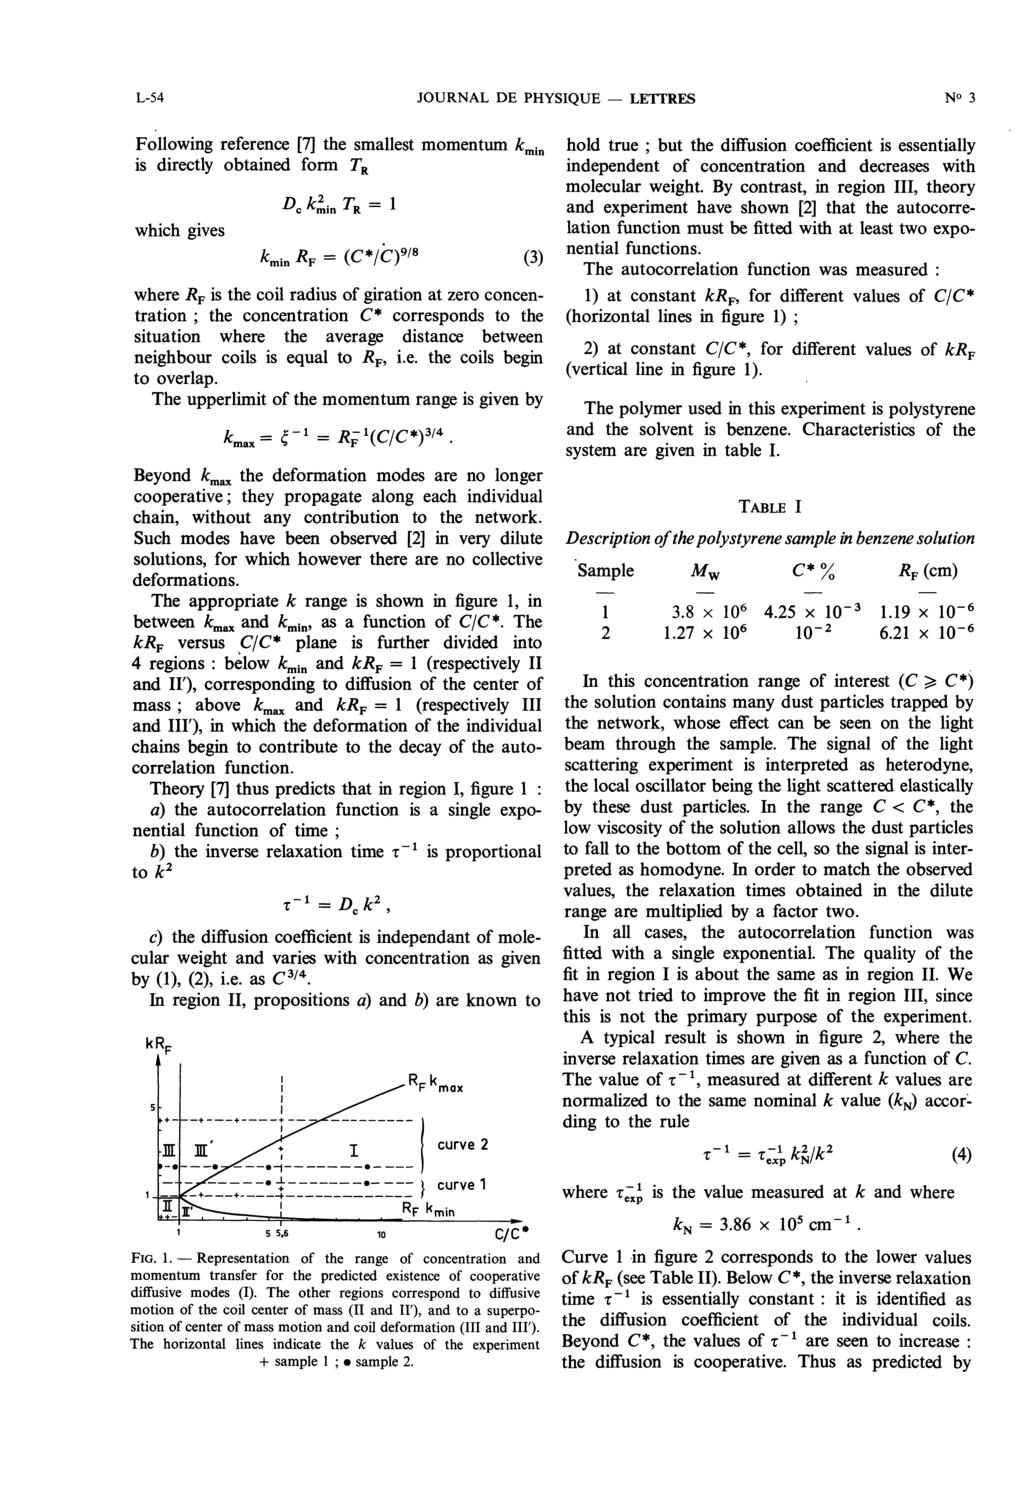 Representation L54 JOURNAL DE PHYSIQUE LETTRES Following reference [7] the smallest momentum kmin is directly obtained form TR which gives where RF is the coil radius of giration at zero